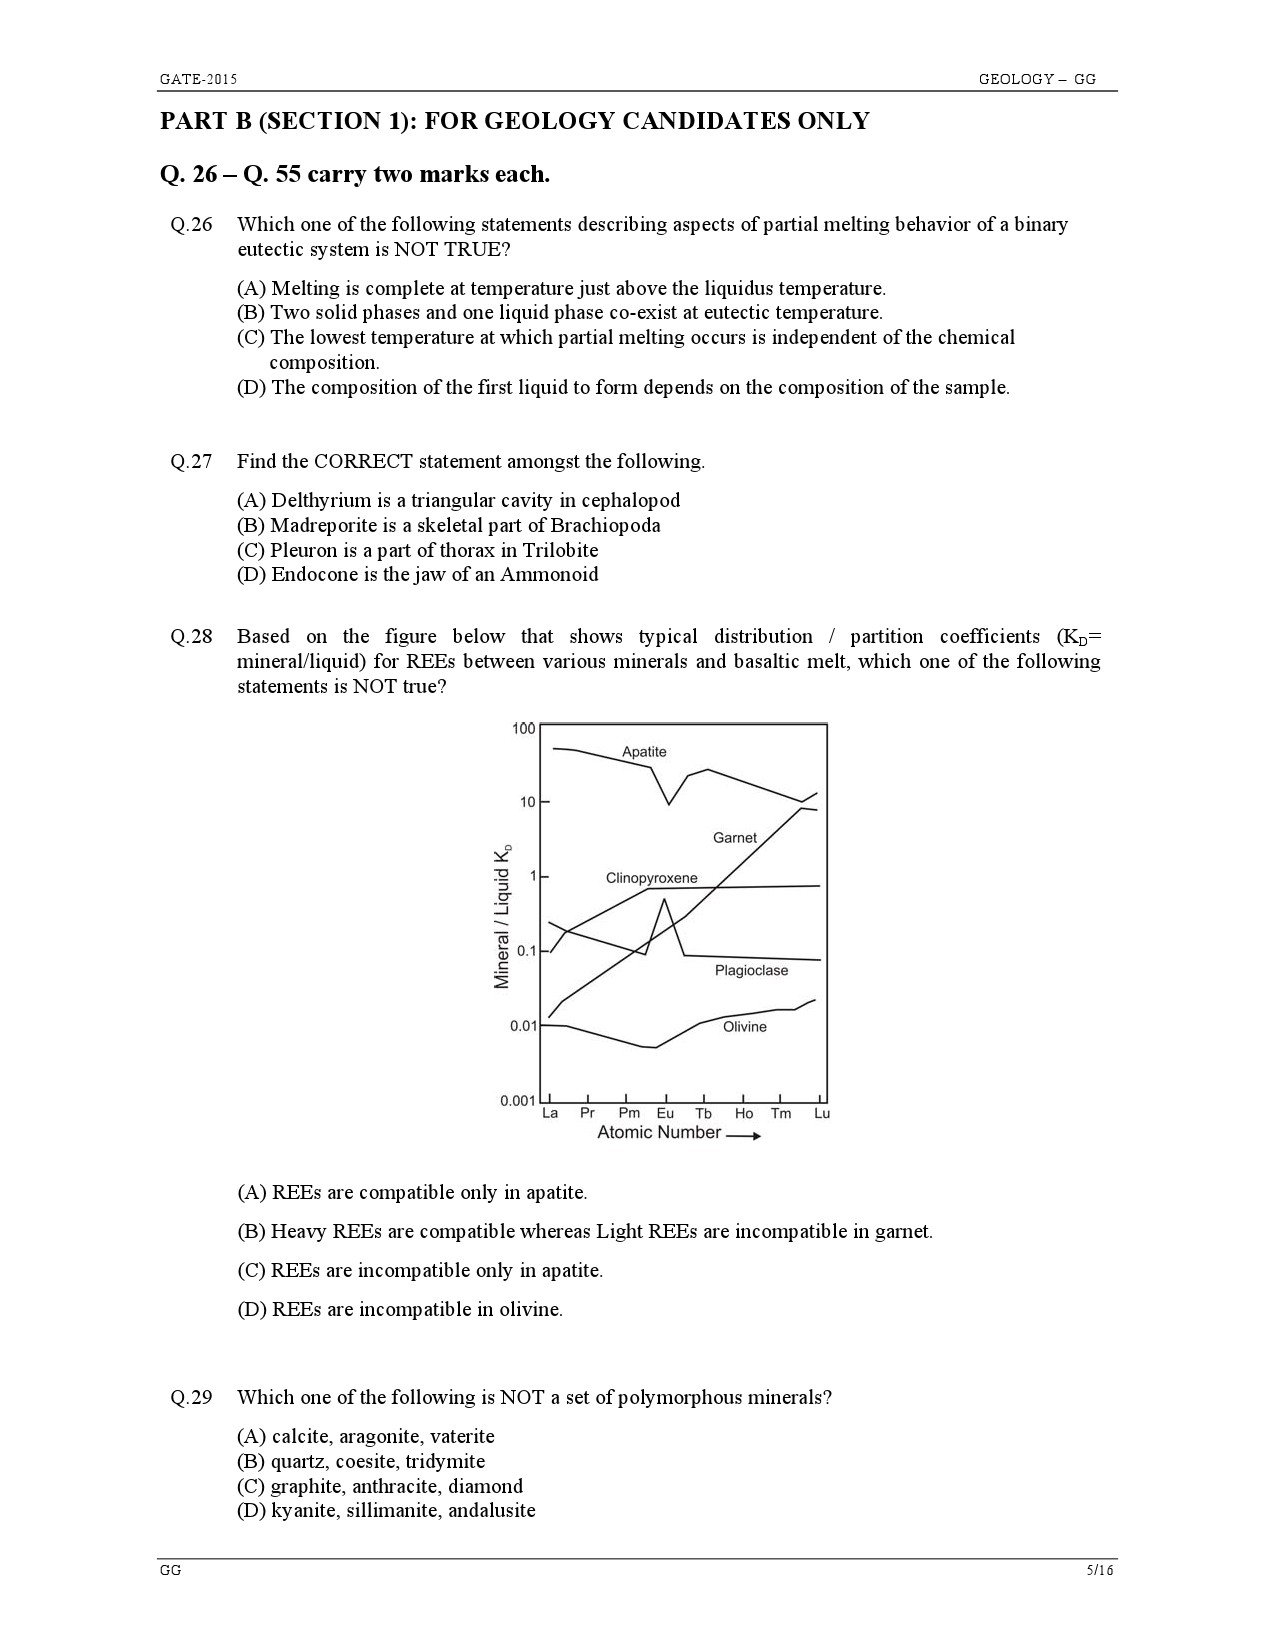 GATE Exam Question Paper 2015 Geology and Geophysics 5